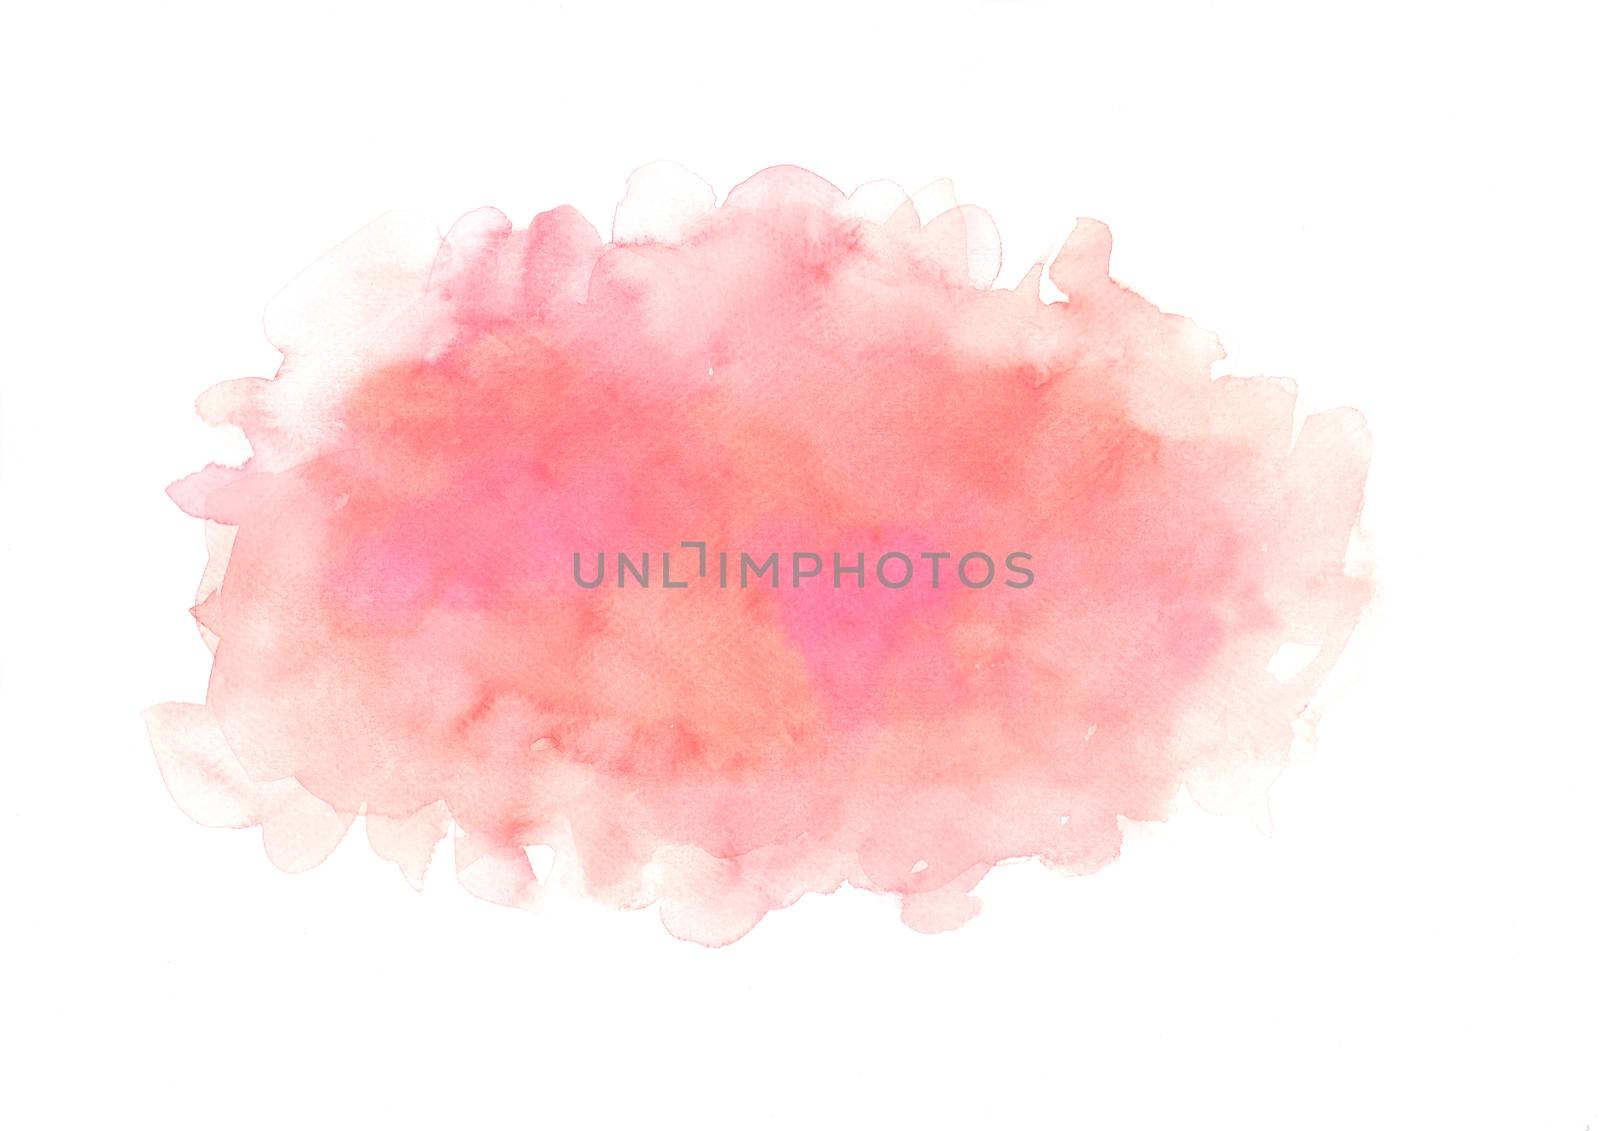 Hand painted abstract orange and pink watercolor on white backgr by Ungamrung